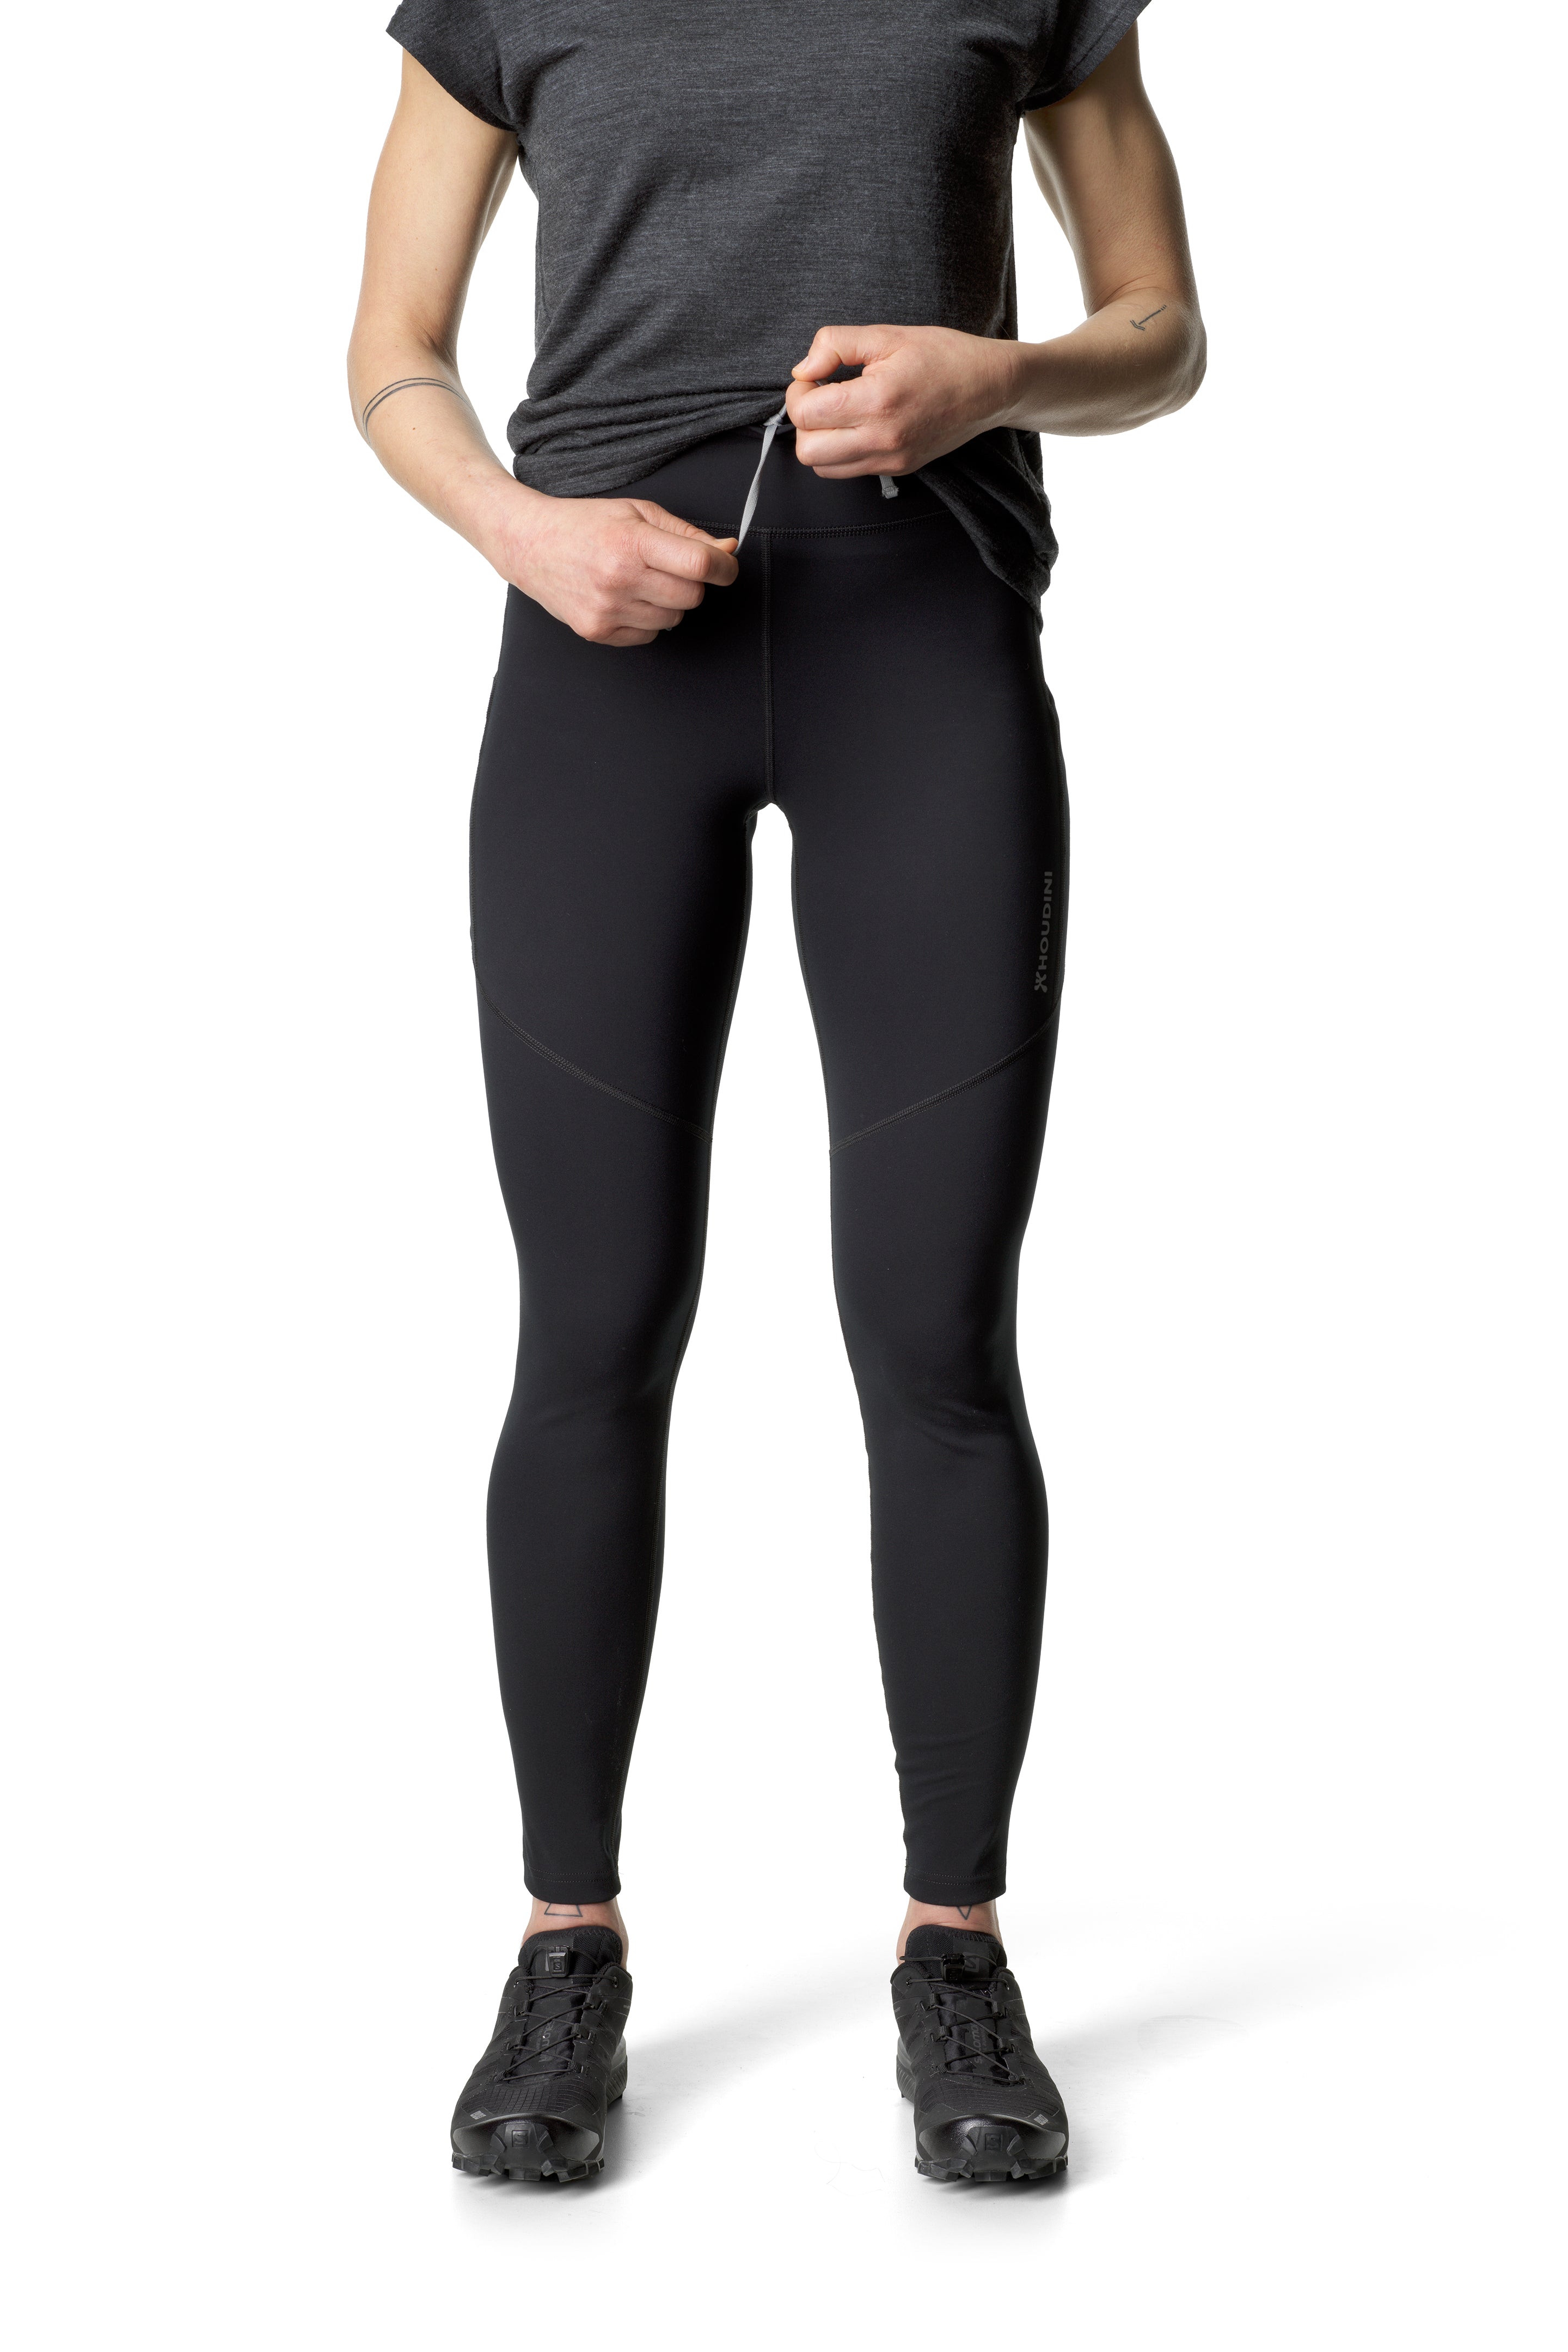 Houdini Women's Motion Top Pants - Recycled Polyester – Weekendbee